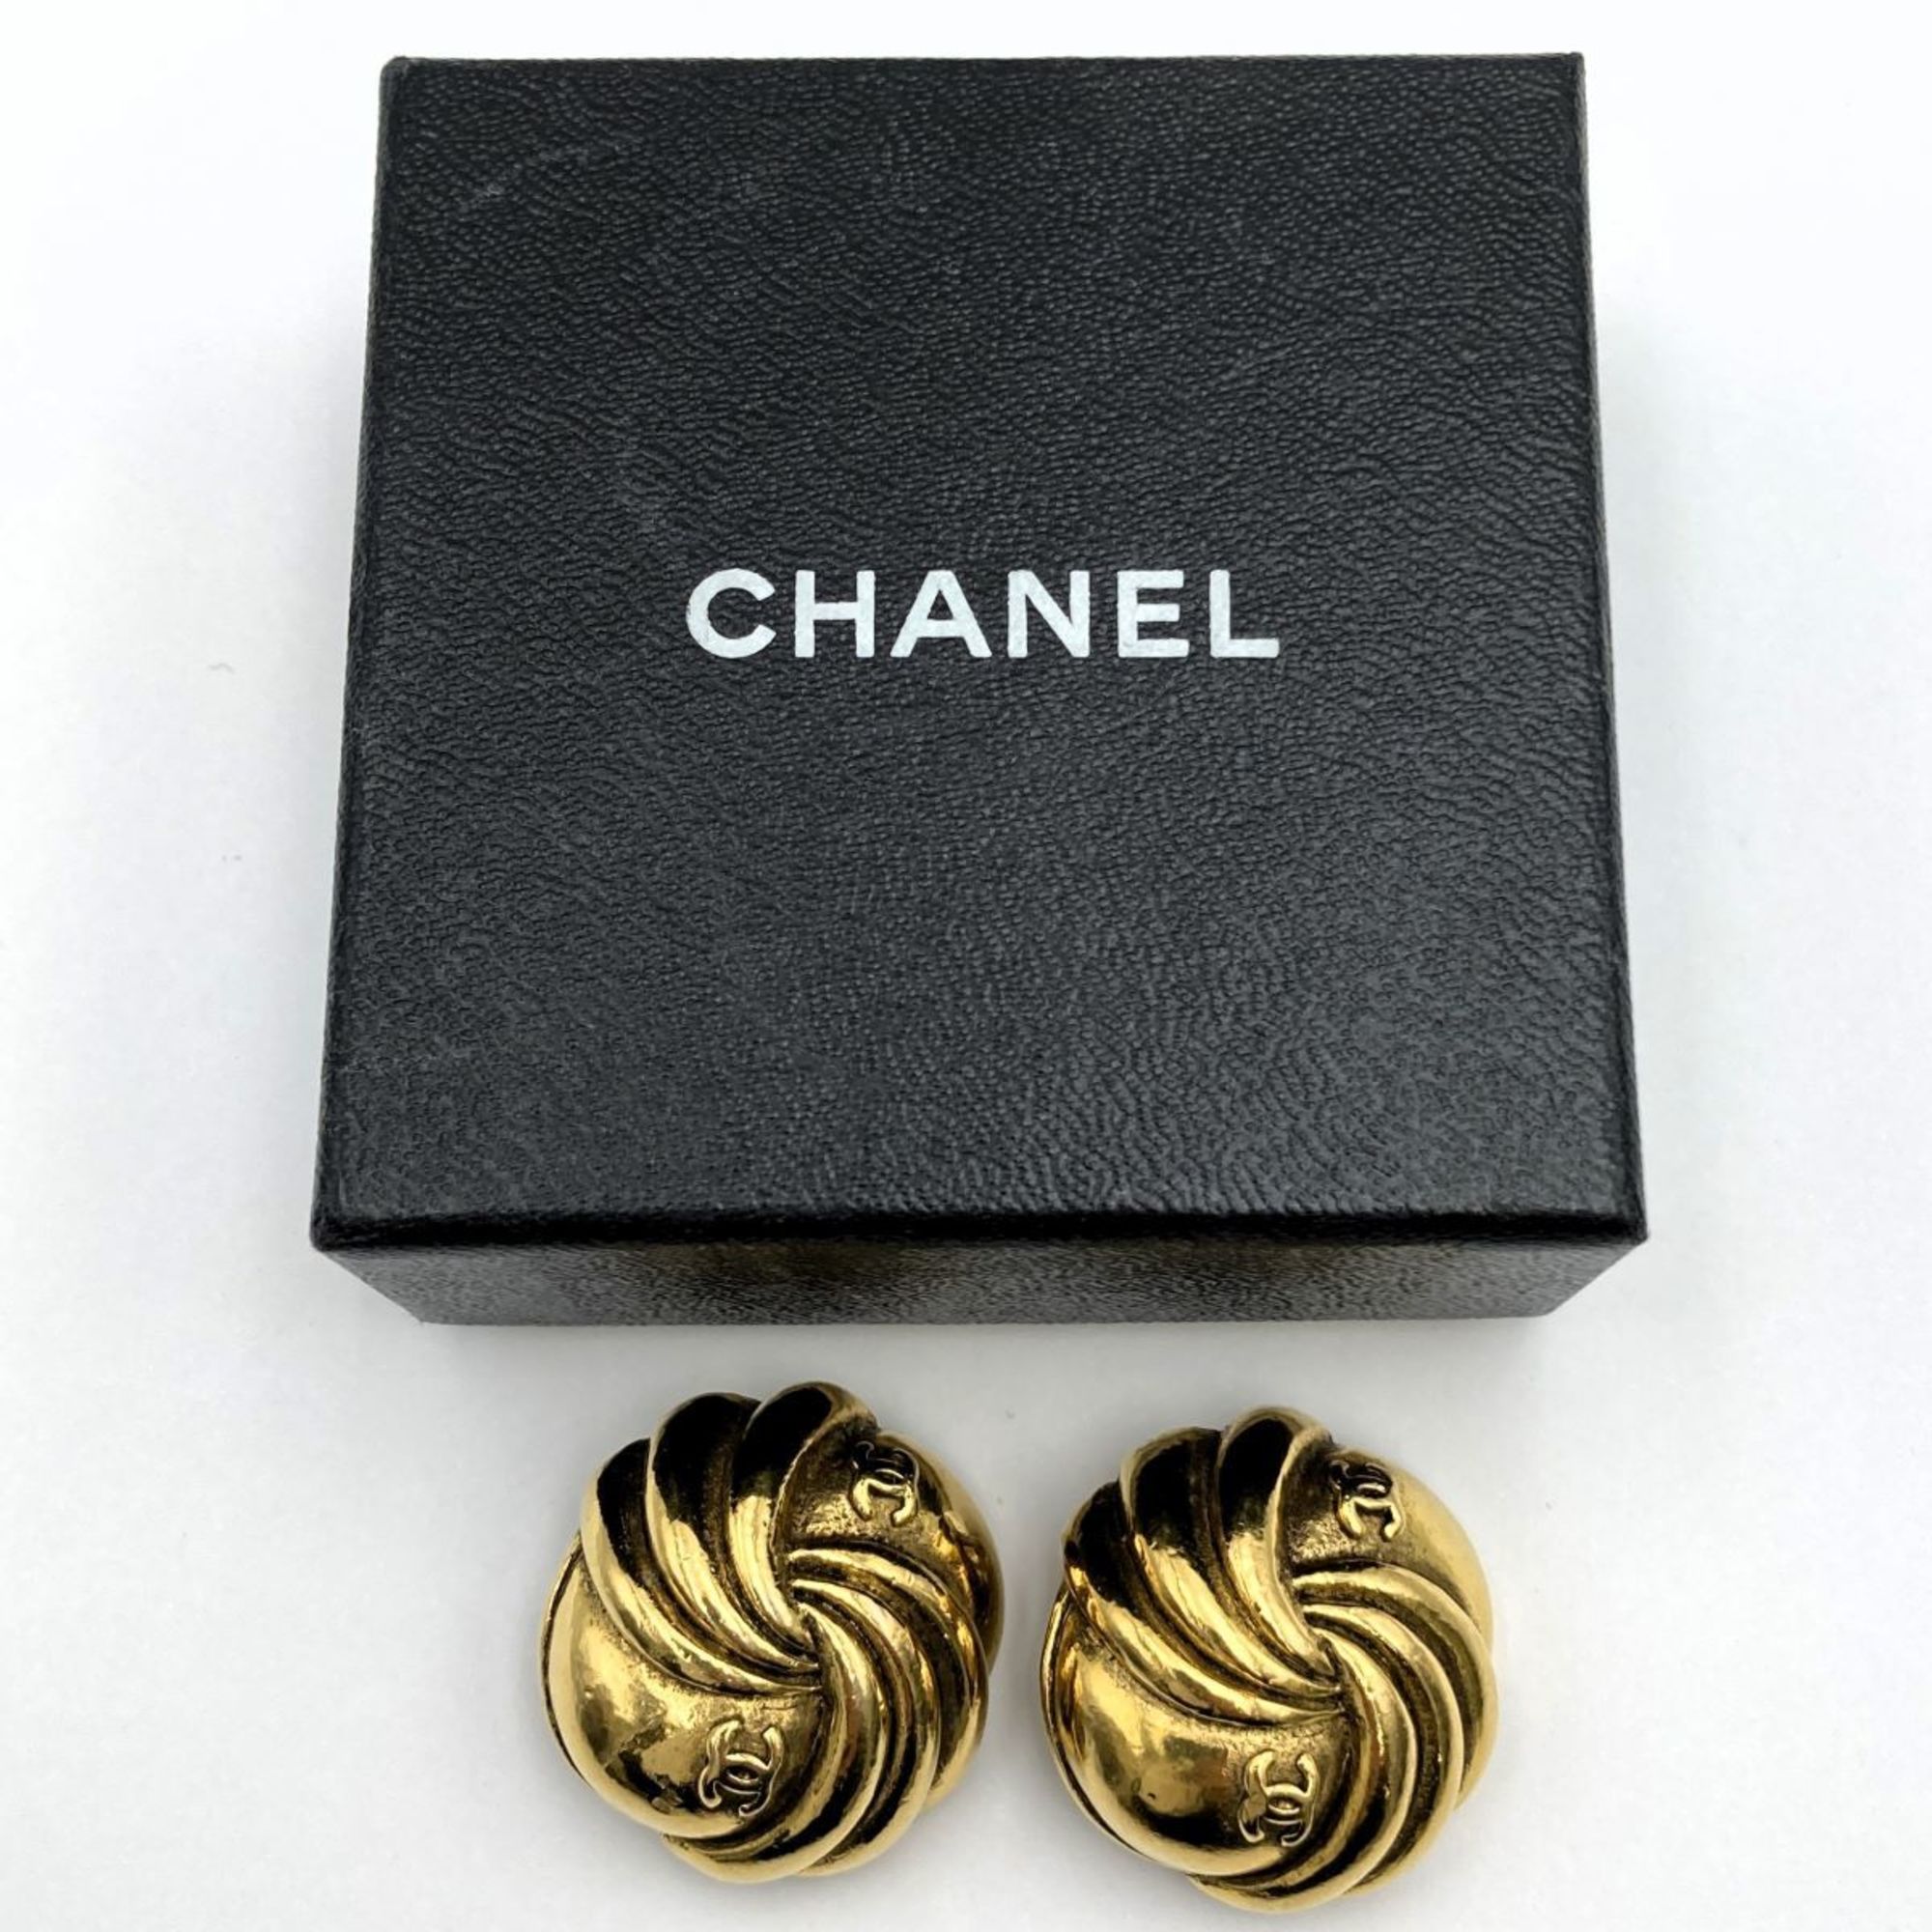 CHANEL Chanel Earrings Double Coco Mark Accessories Gold Ladies Fashion Vintage